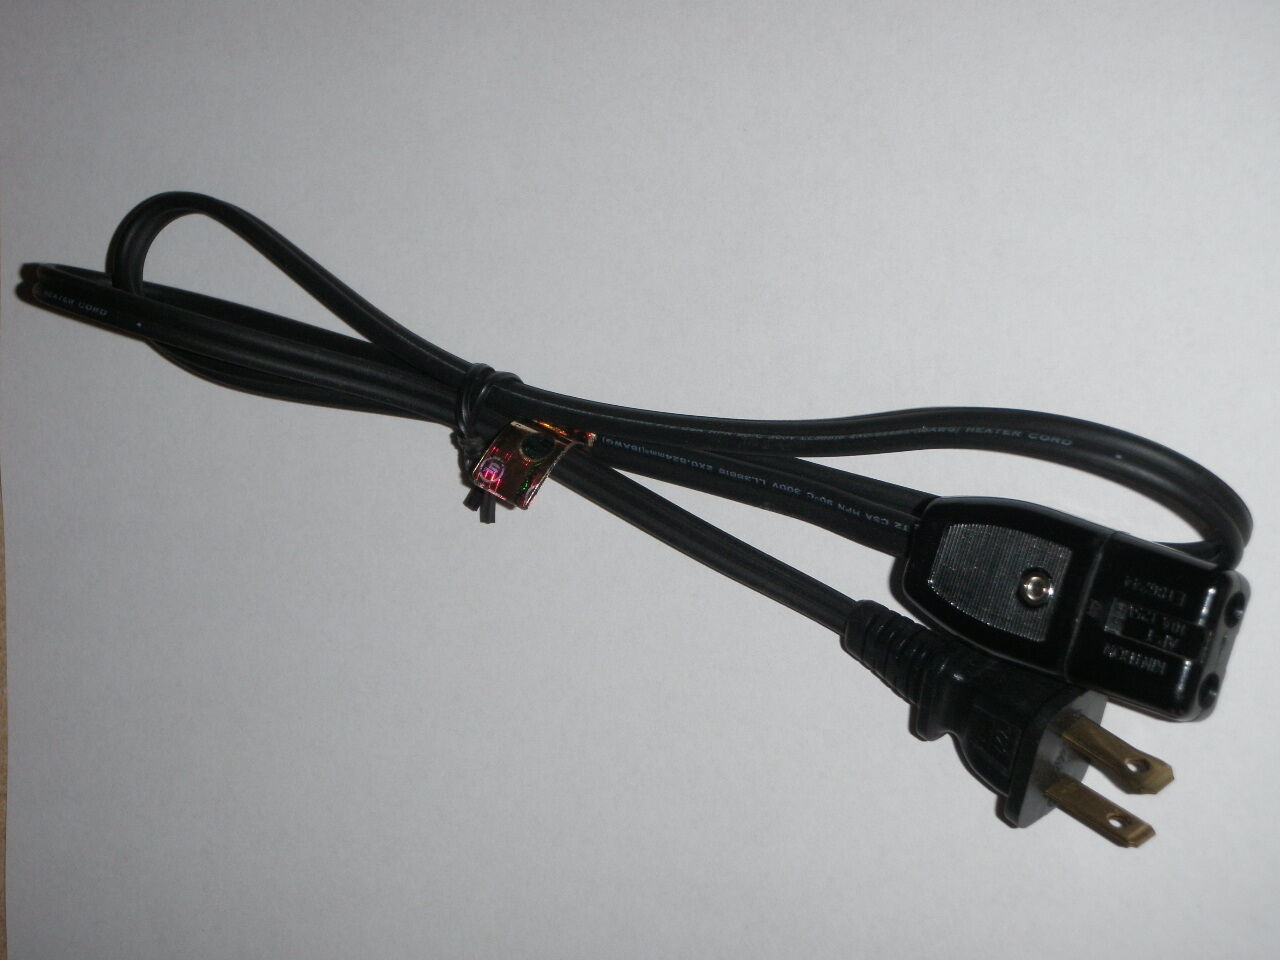 Primary image for 2pin Power Cord for West Bend Corn Popper Model 5480 (Choose Length)